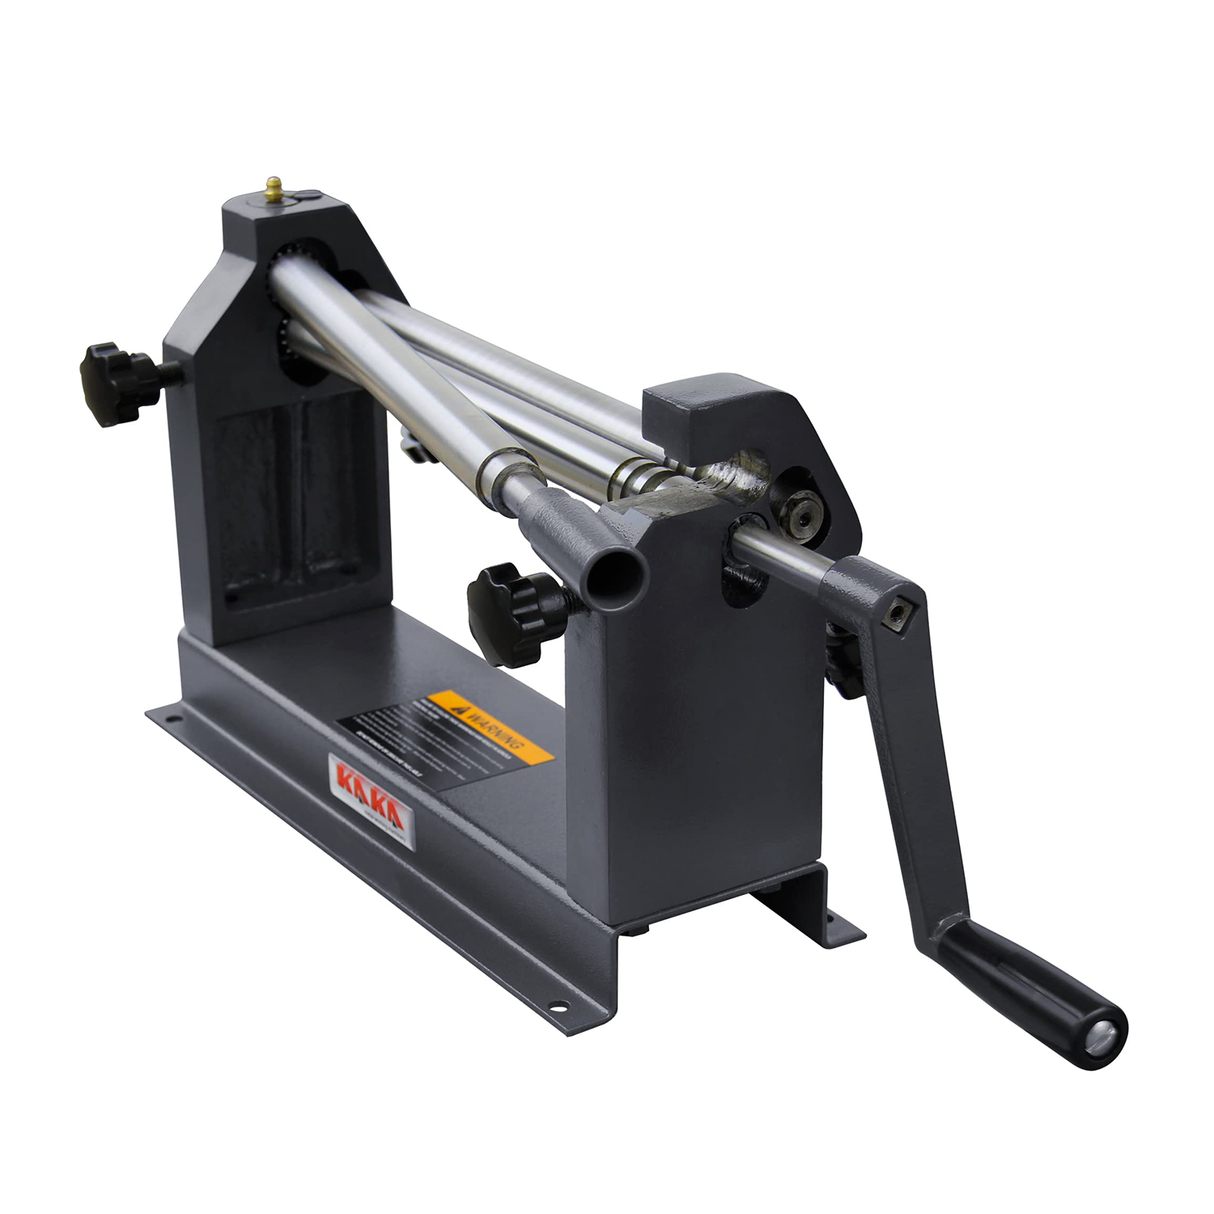 KANG Industrial W01-1222 Slip Roll Machine, Sheet Metal Roller Machine With Two Removable Rollers, 305mm Slip Roll Roller Bending Round Machine